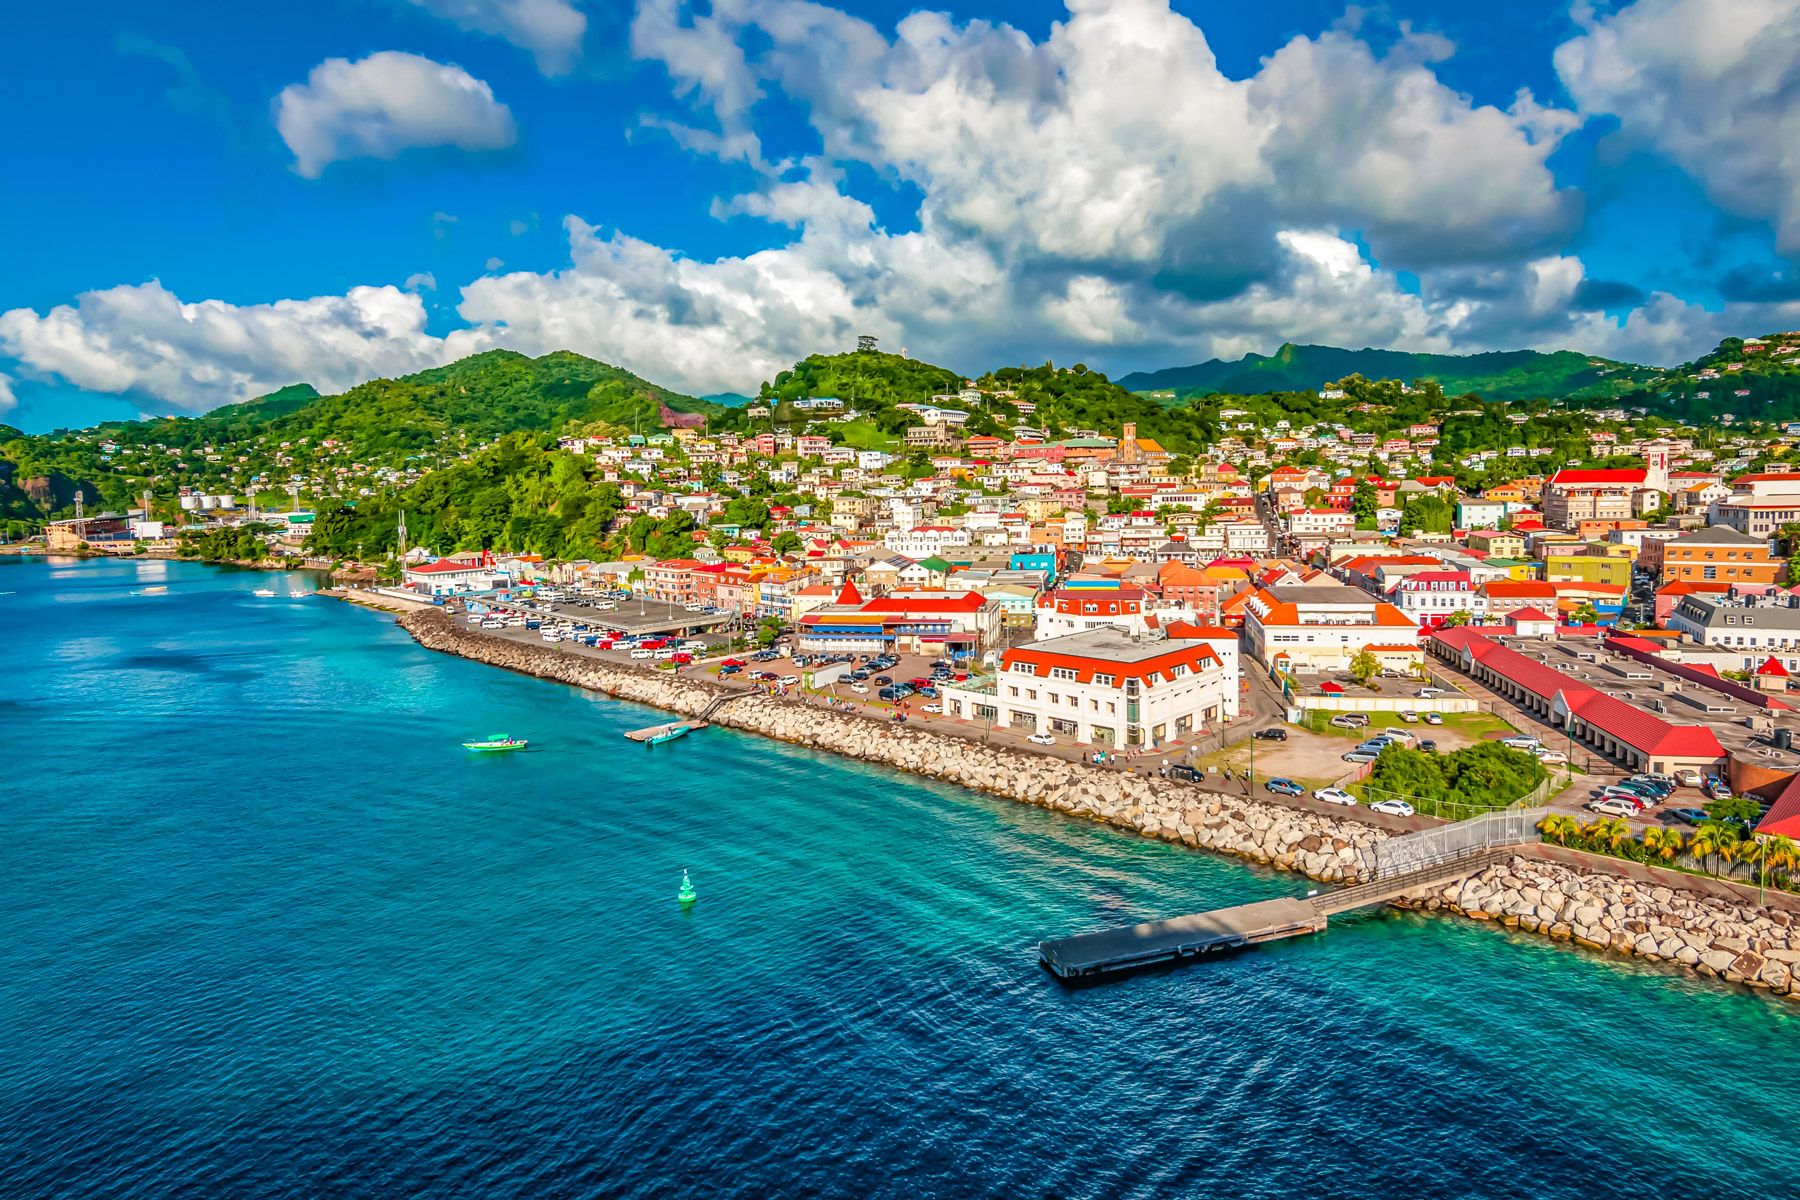 7 Things to Do in Grenada - The Spice Isle